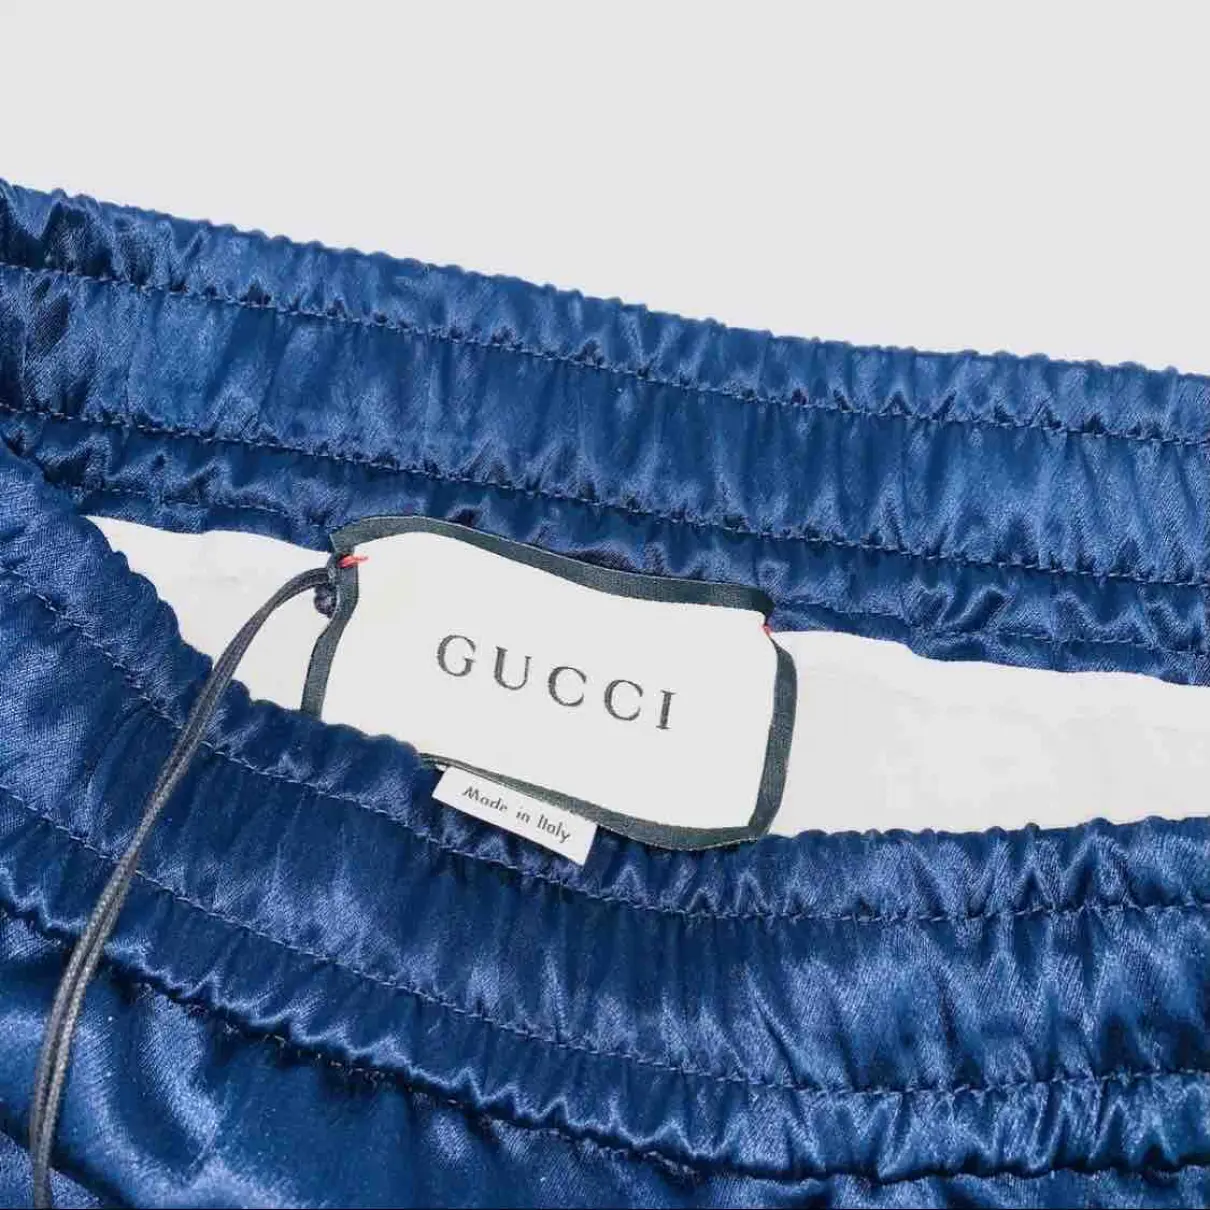 Blue Synthetic Shorts Gucci